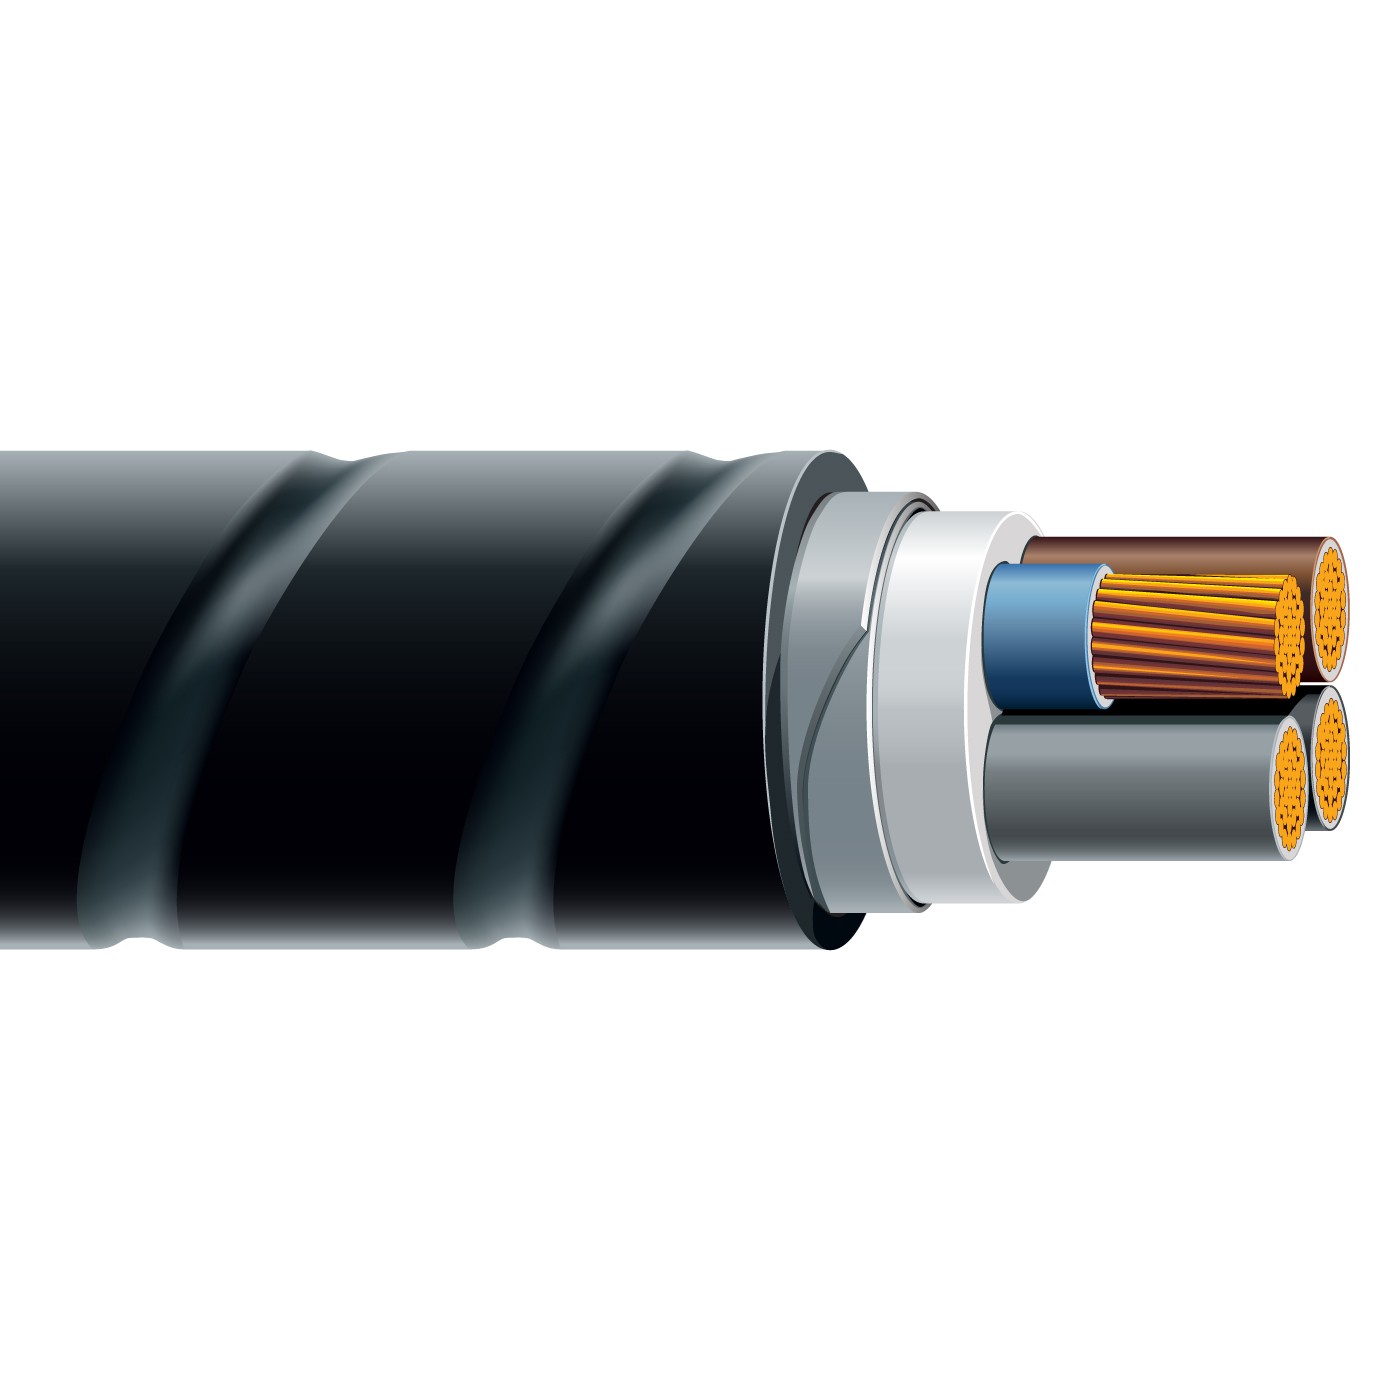 NYBY PVC, PVC, STA, PVC armored cable